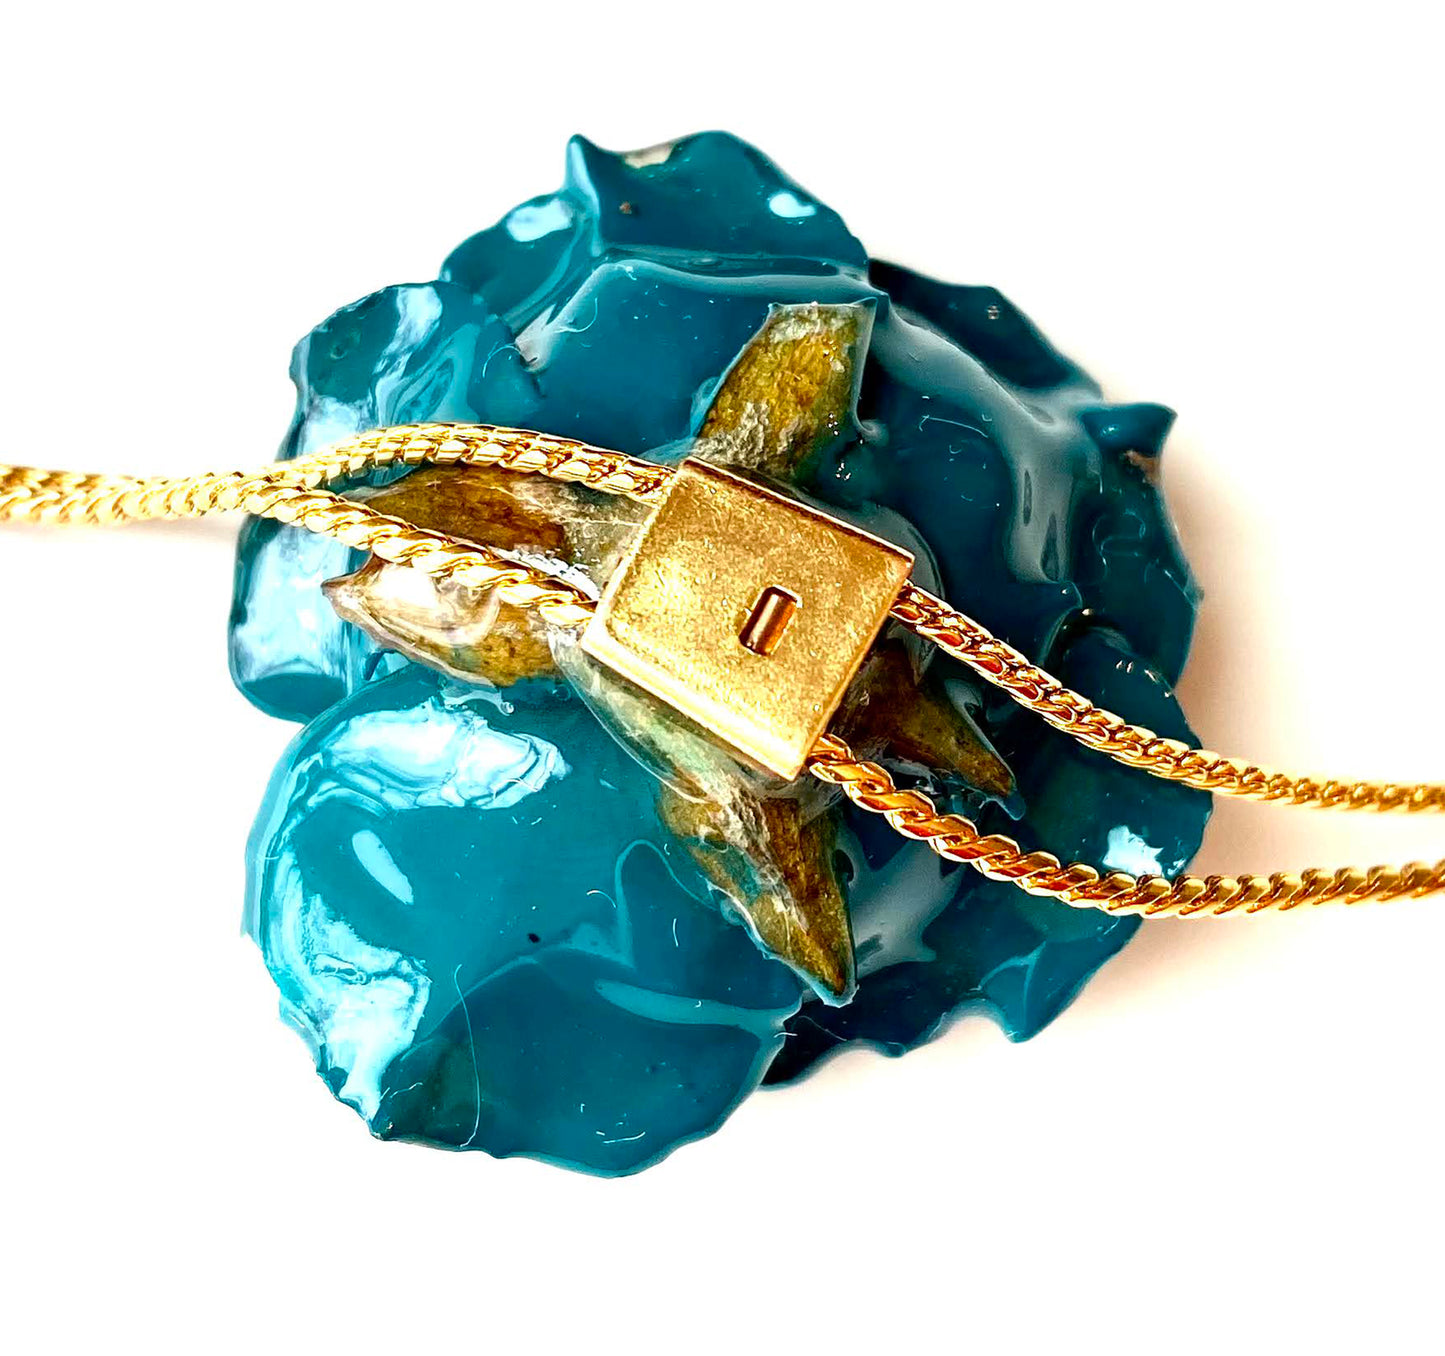 Mini Rose Mini 1.5-2.25 inch Pendant Necklace 18 inch Gold Plated 24K (Turquoise)